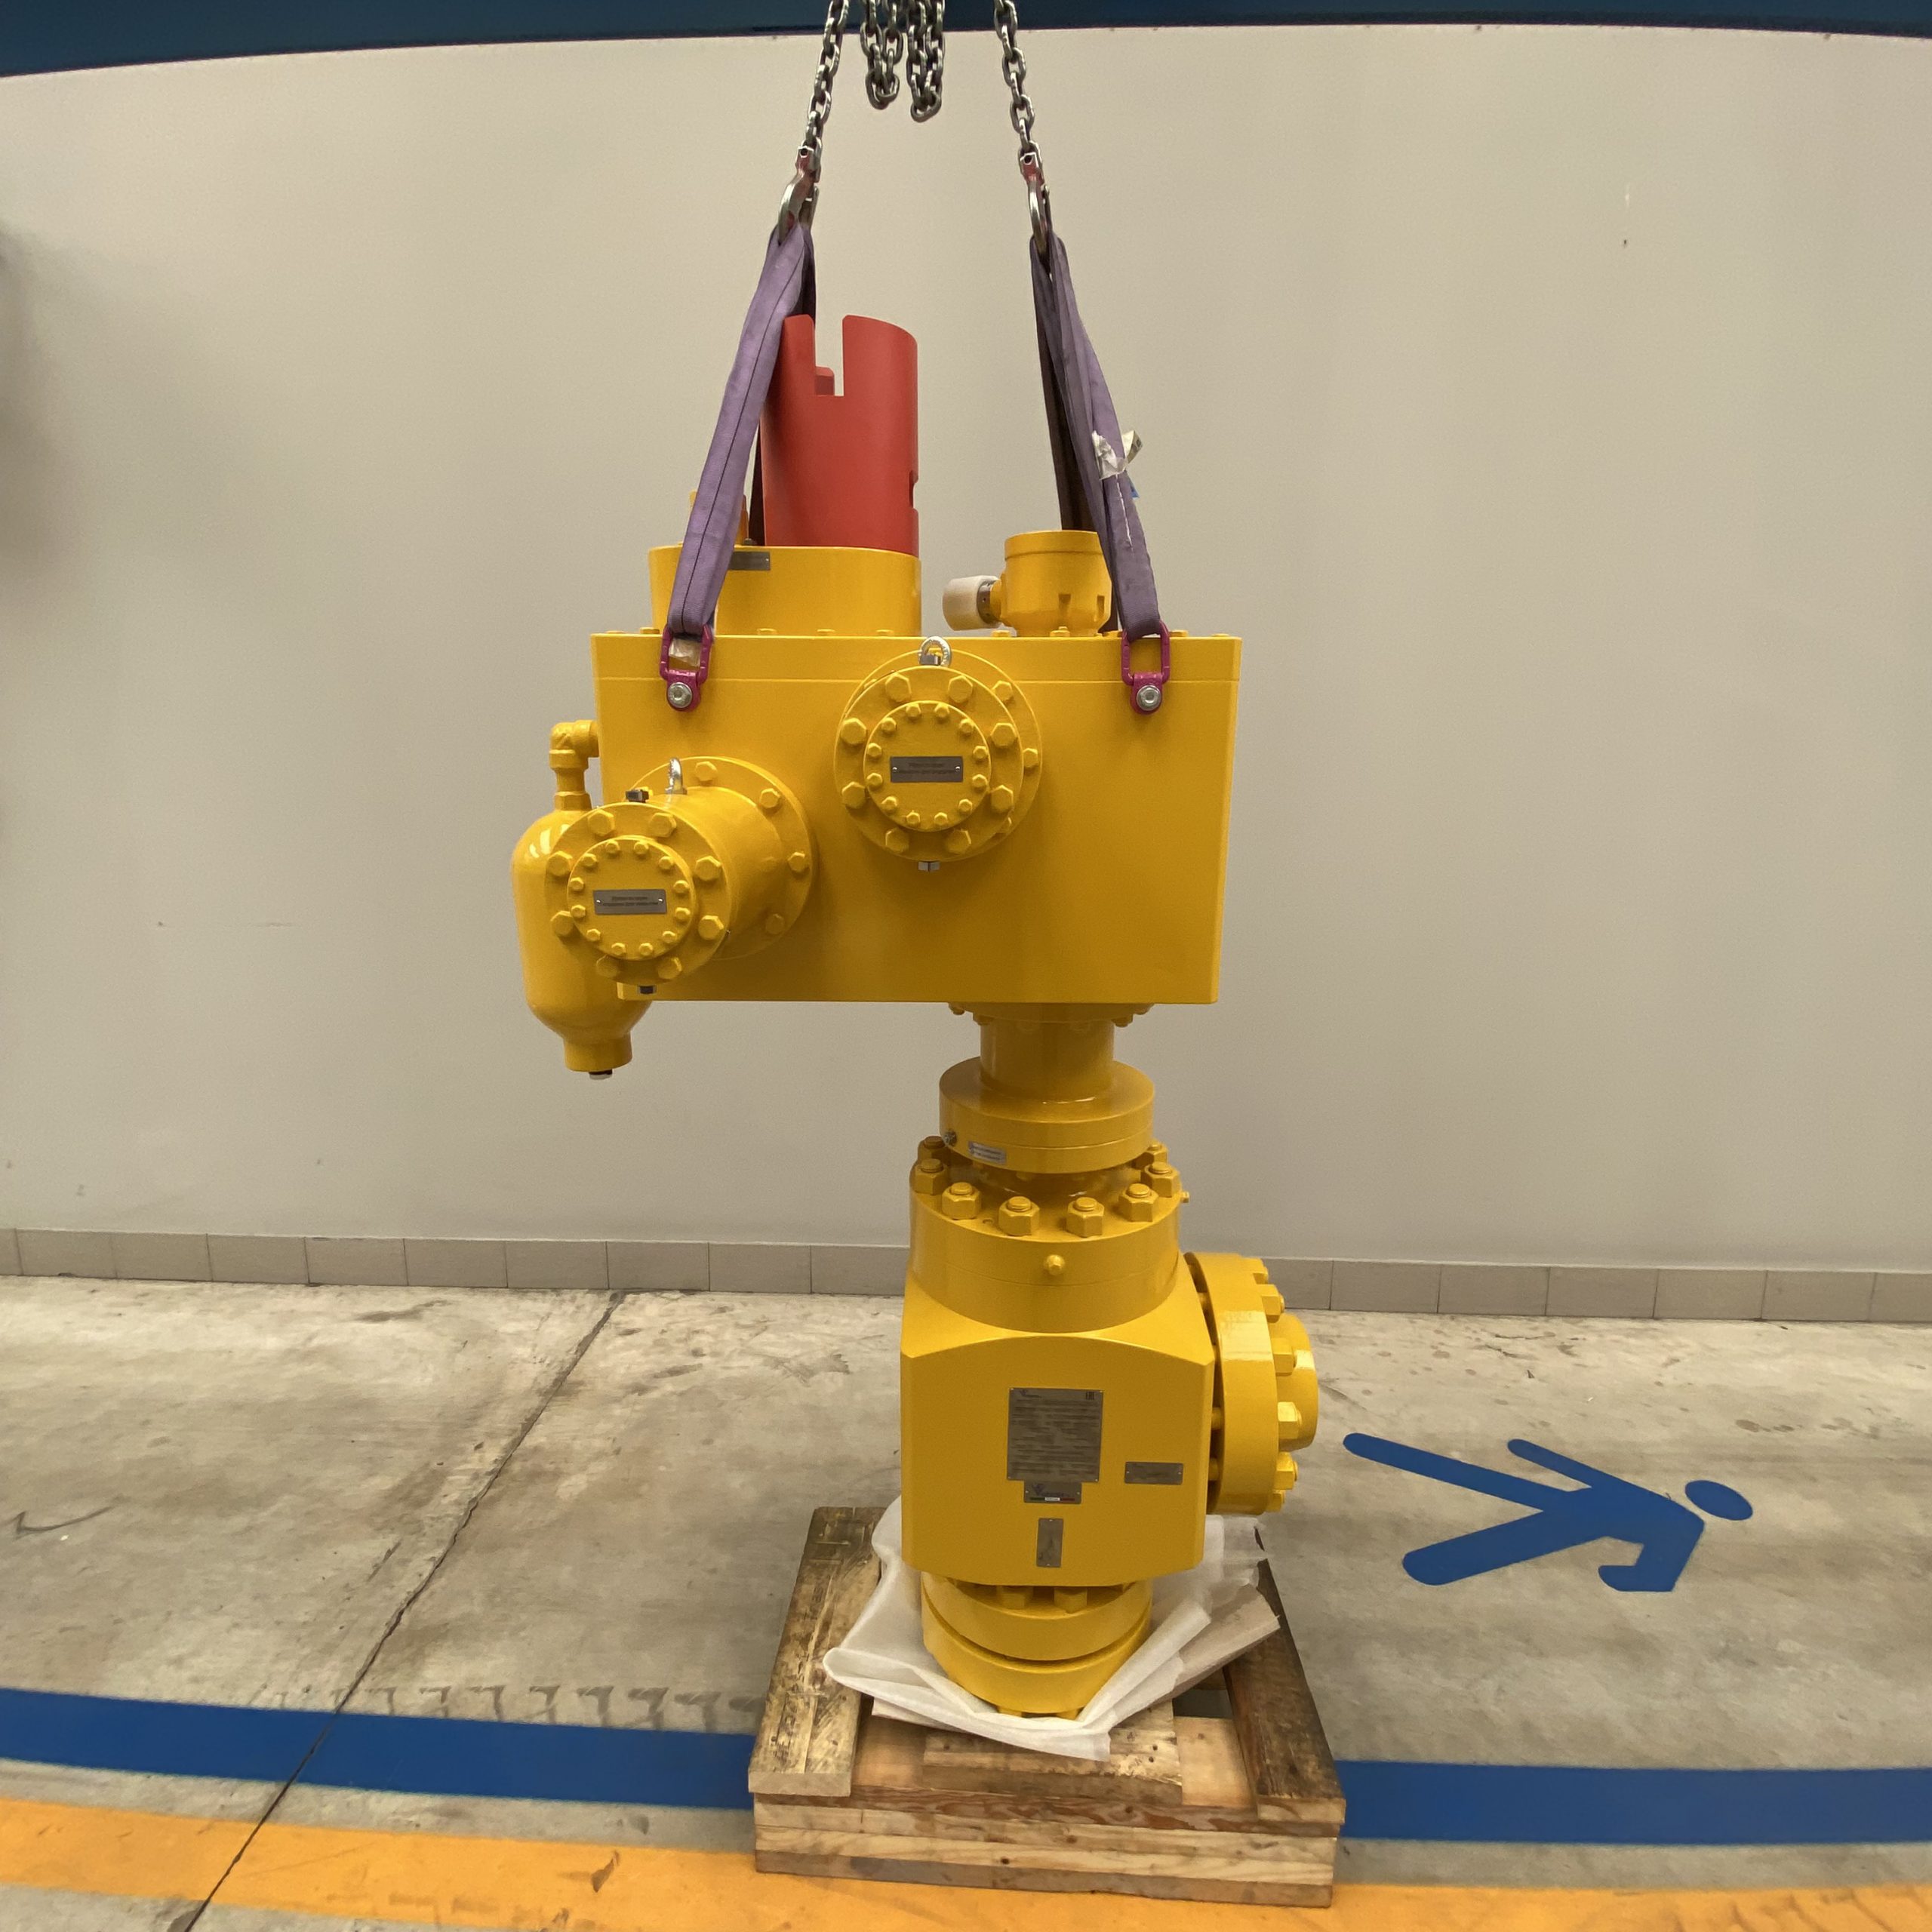 FG Valvole - Production of the first Subsea Valves equipped with Stepper Actuators